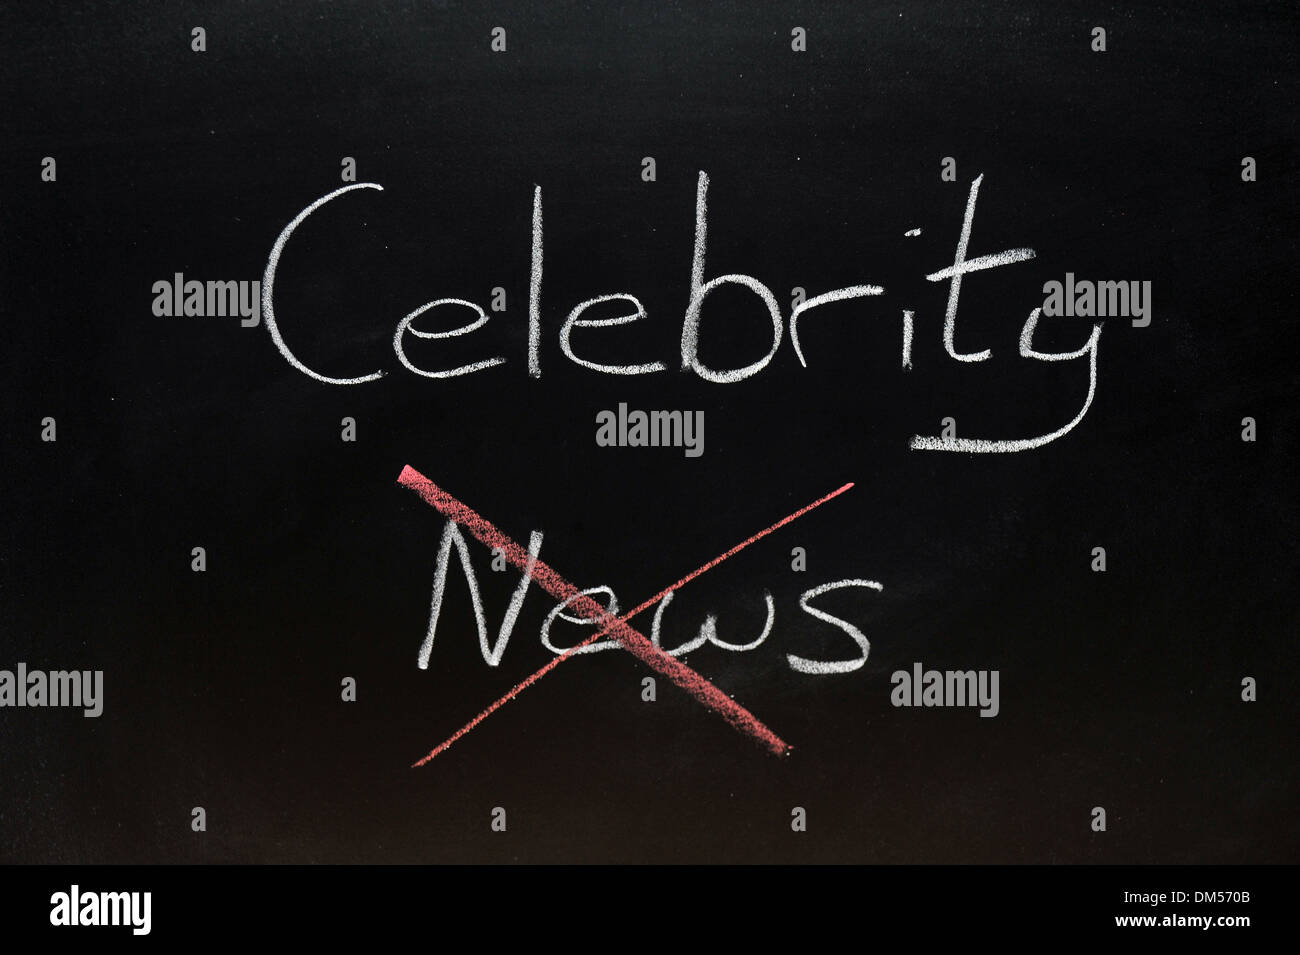 Celebrity News drawn on a blackboard in chalk with news crossed out. Stock Photo